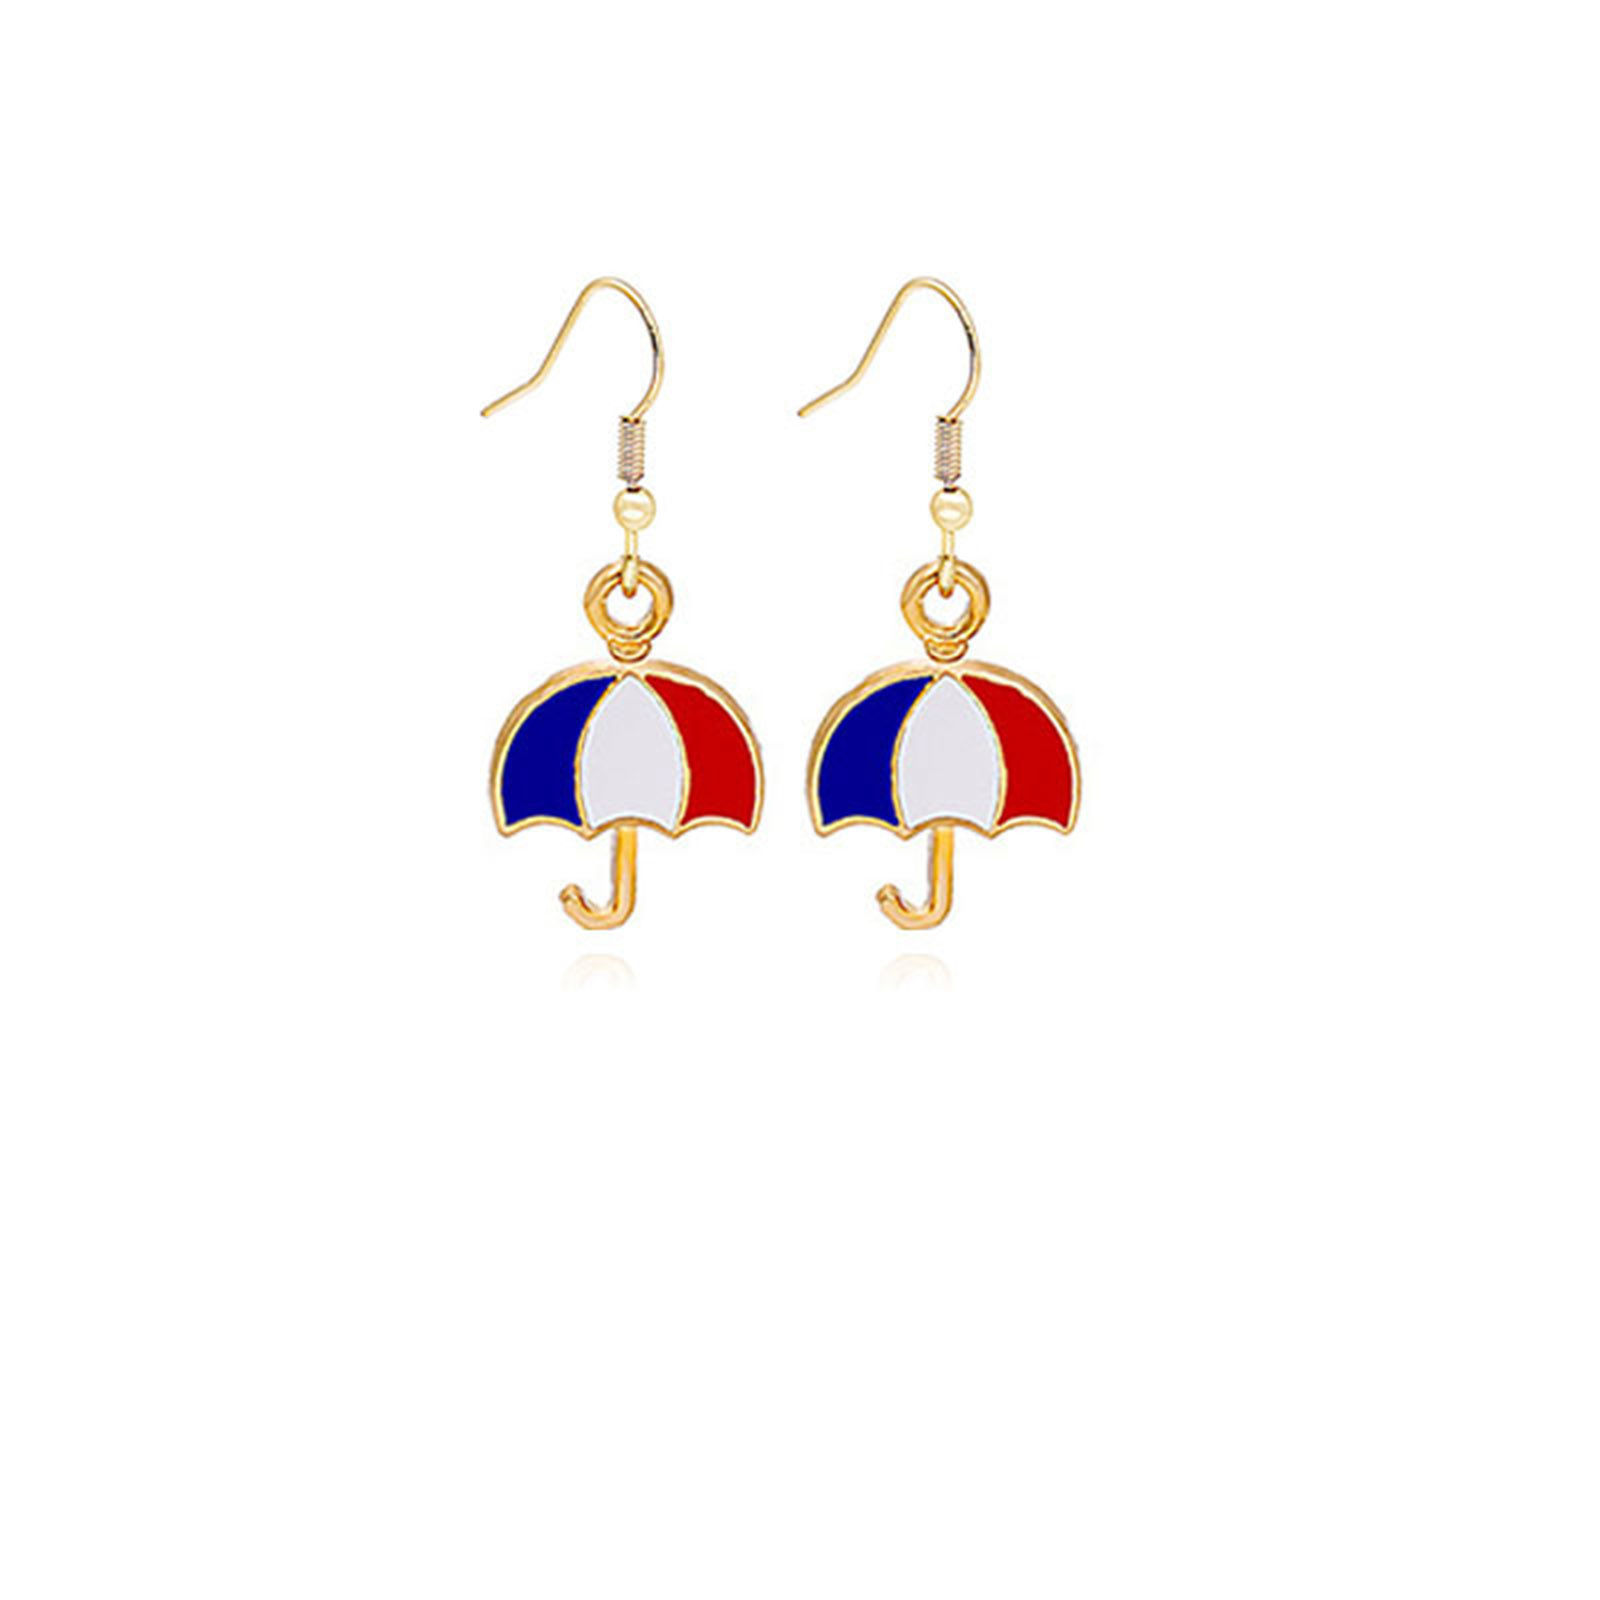 Picture of American Independence Day Ear Wire Hook Earrings Gold Plated Multicolor Umbrella Flag Of The United States Enamel 22mm x 19mm, 1 Pair